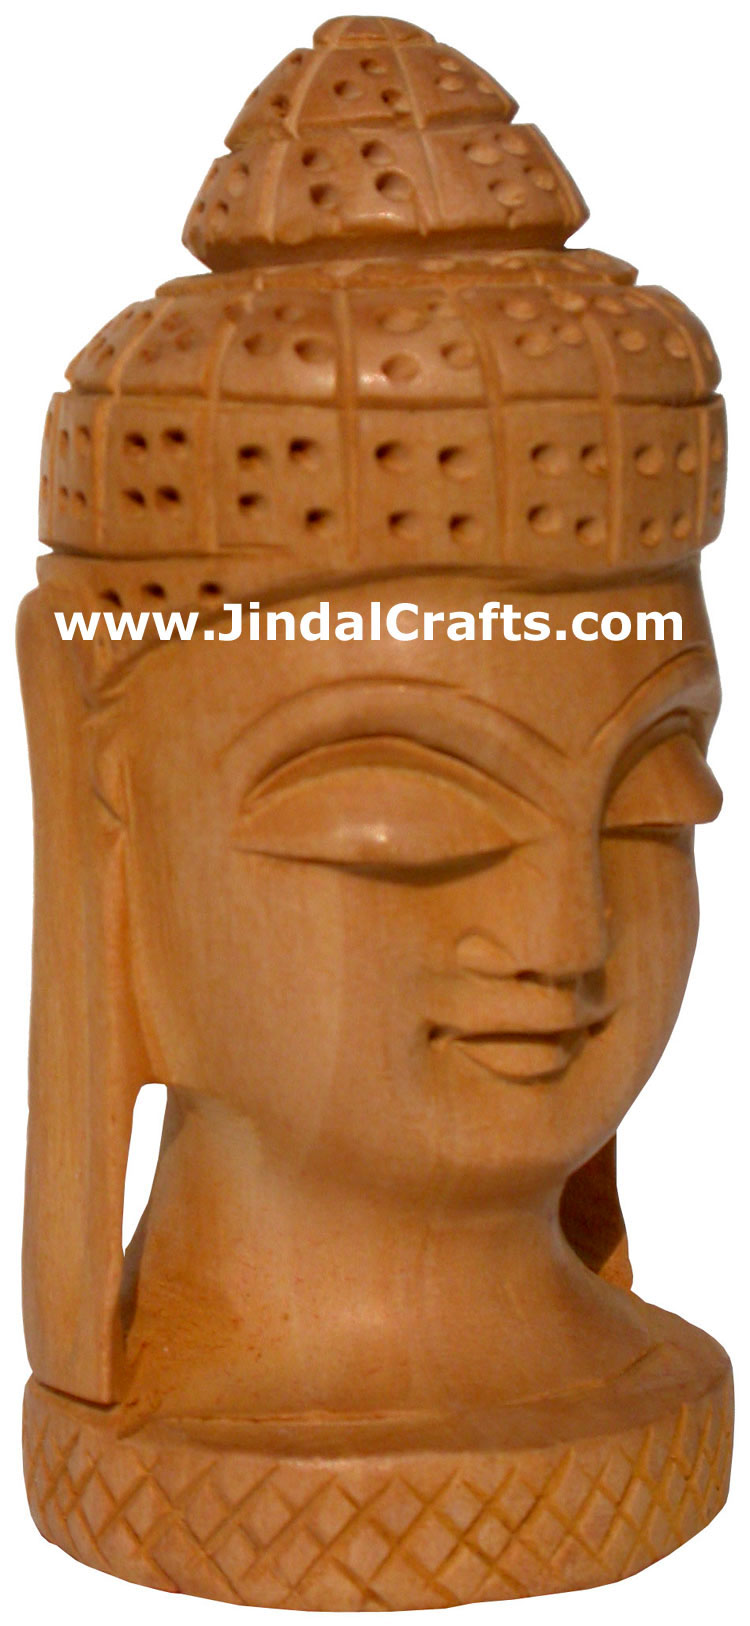 Hand Carved Wood Buddhist Sculpture India Carving Art